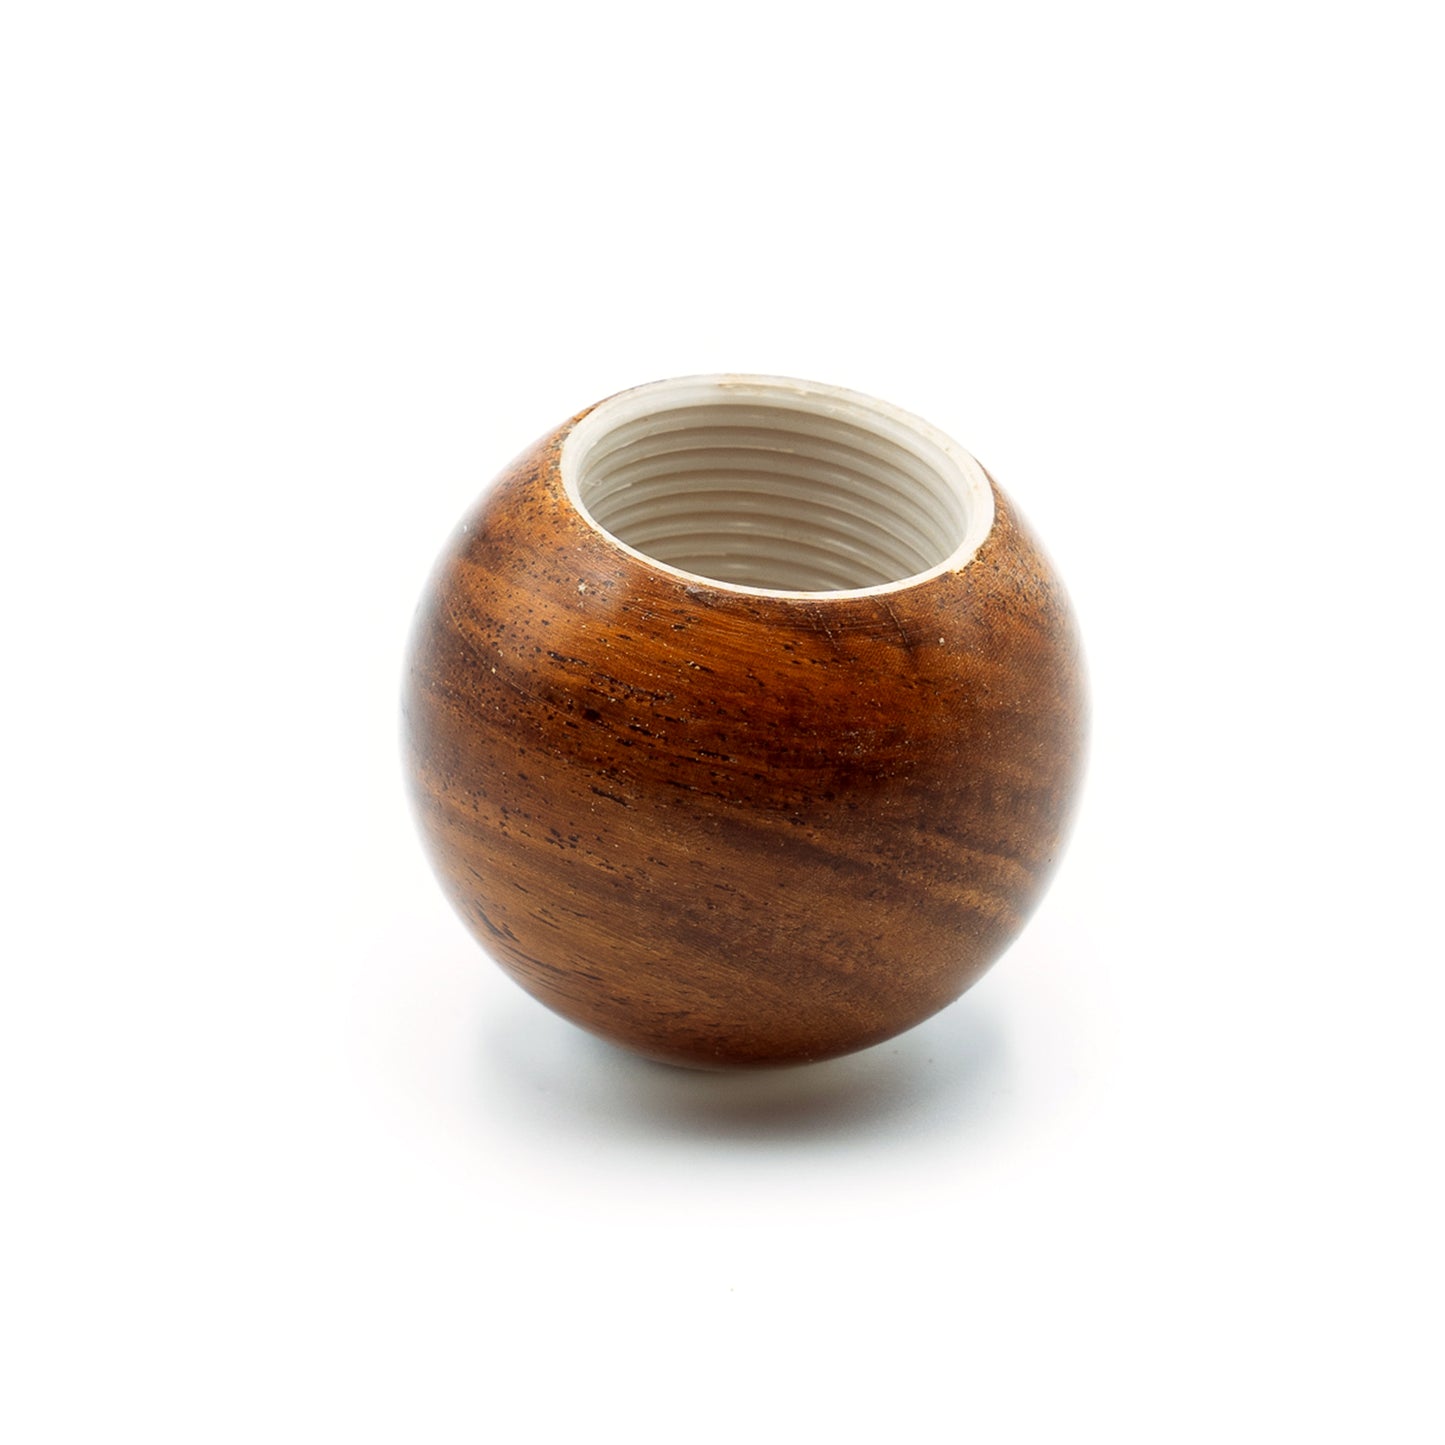 The Force Tamper Ball Handle Wood & Stainless Steel